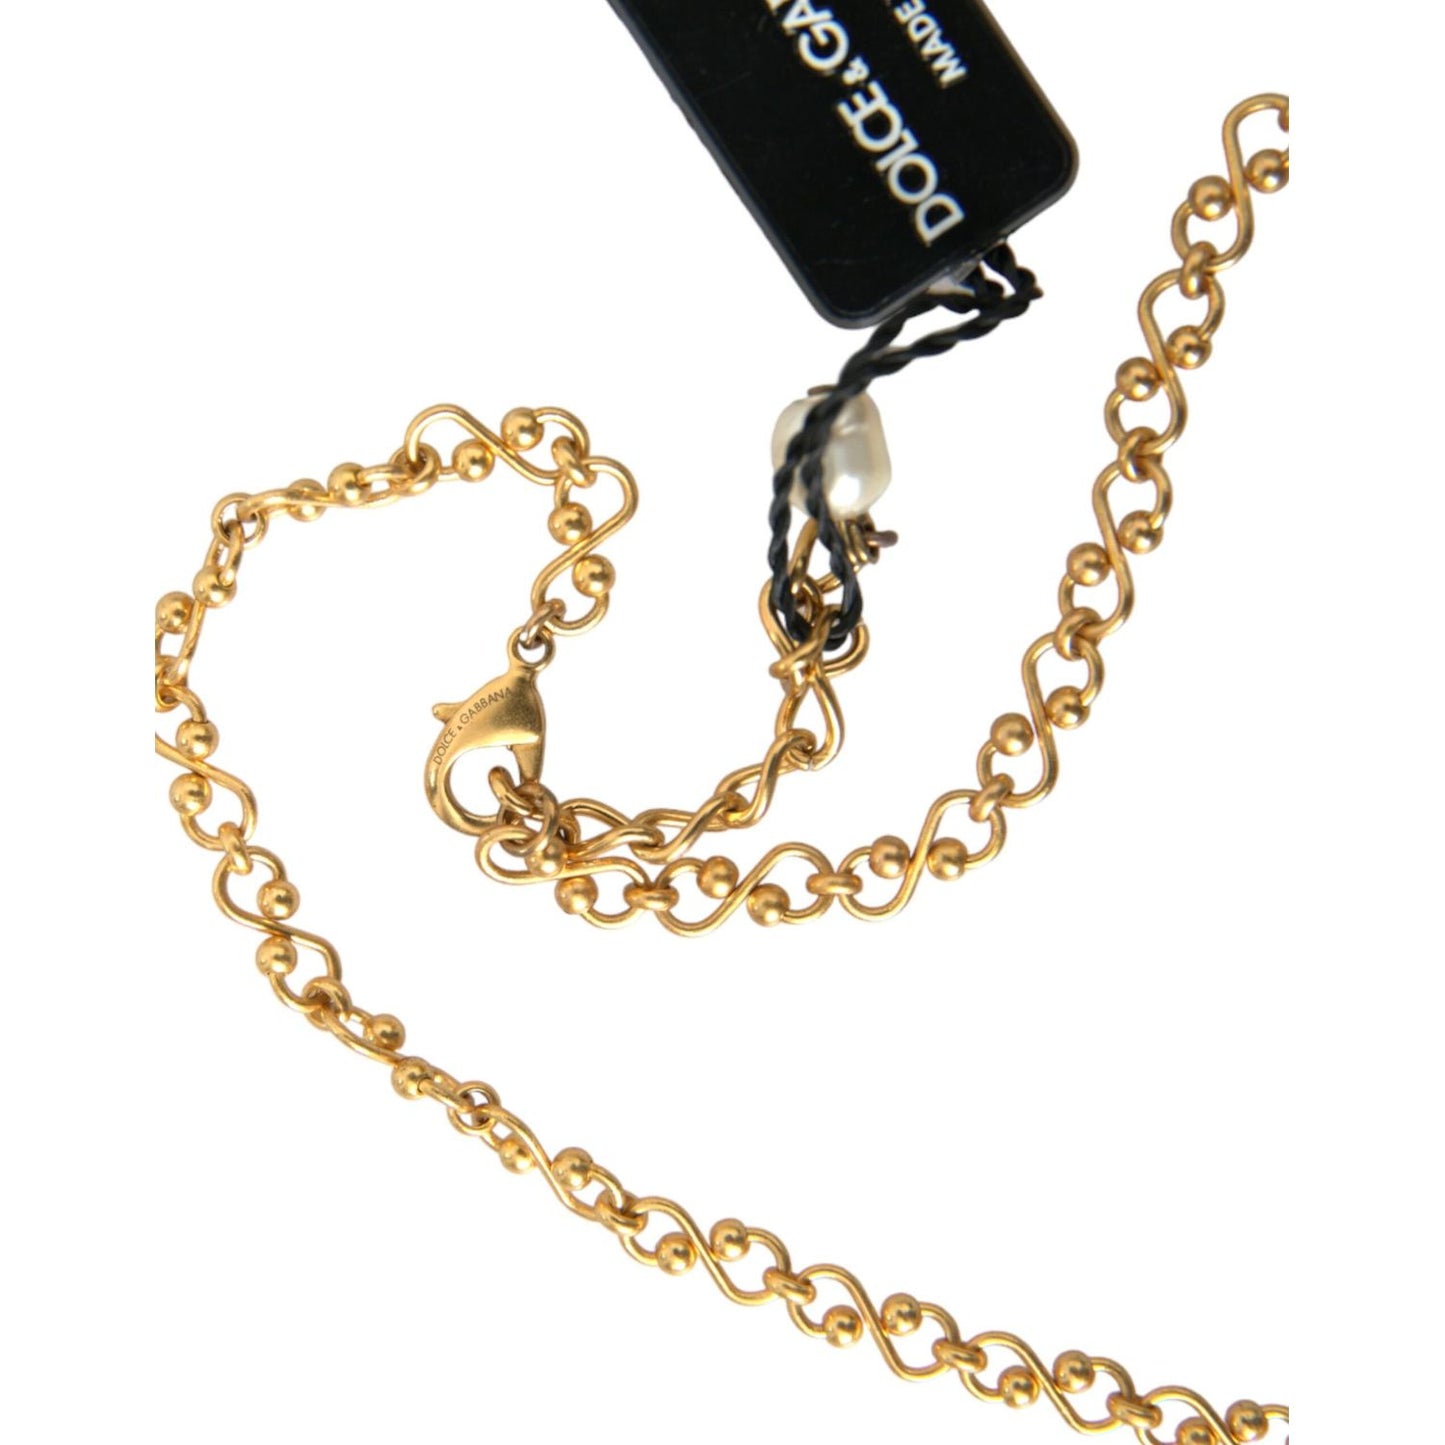 Gold Brass Chain Pearl Pendant Charm Necklace Dolce & Gabbana